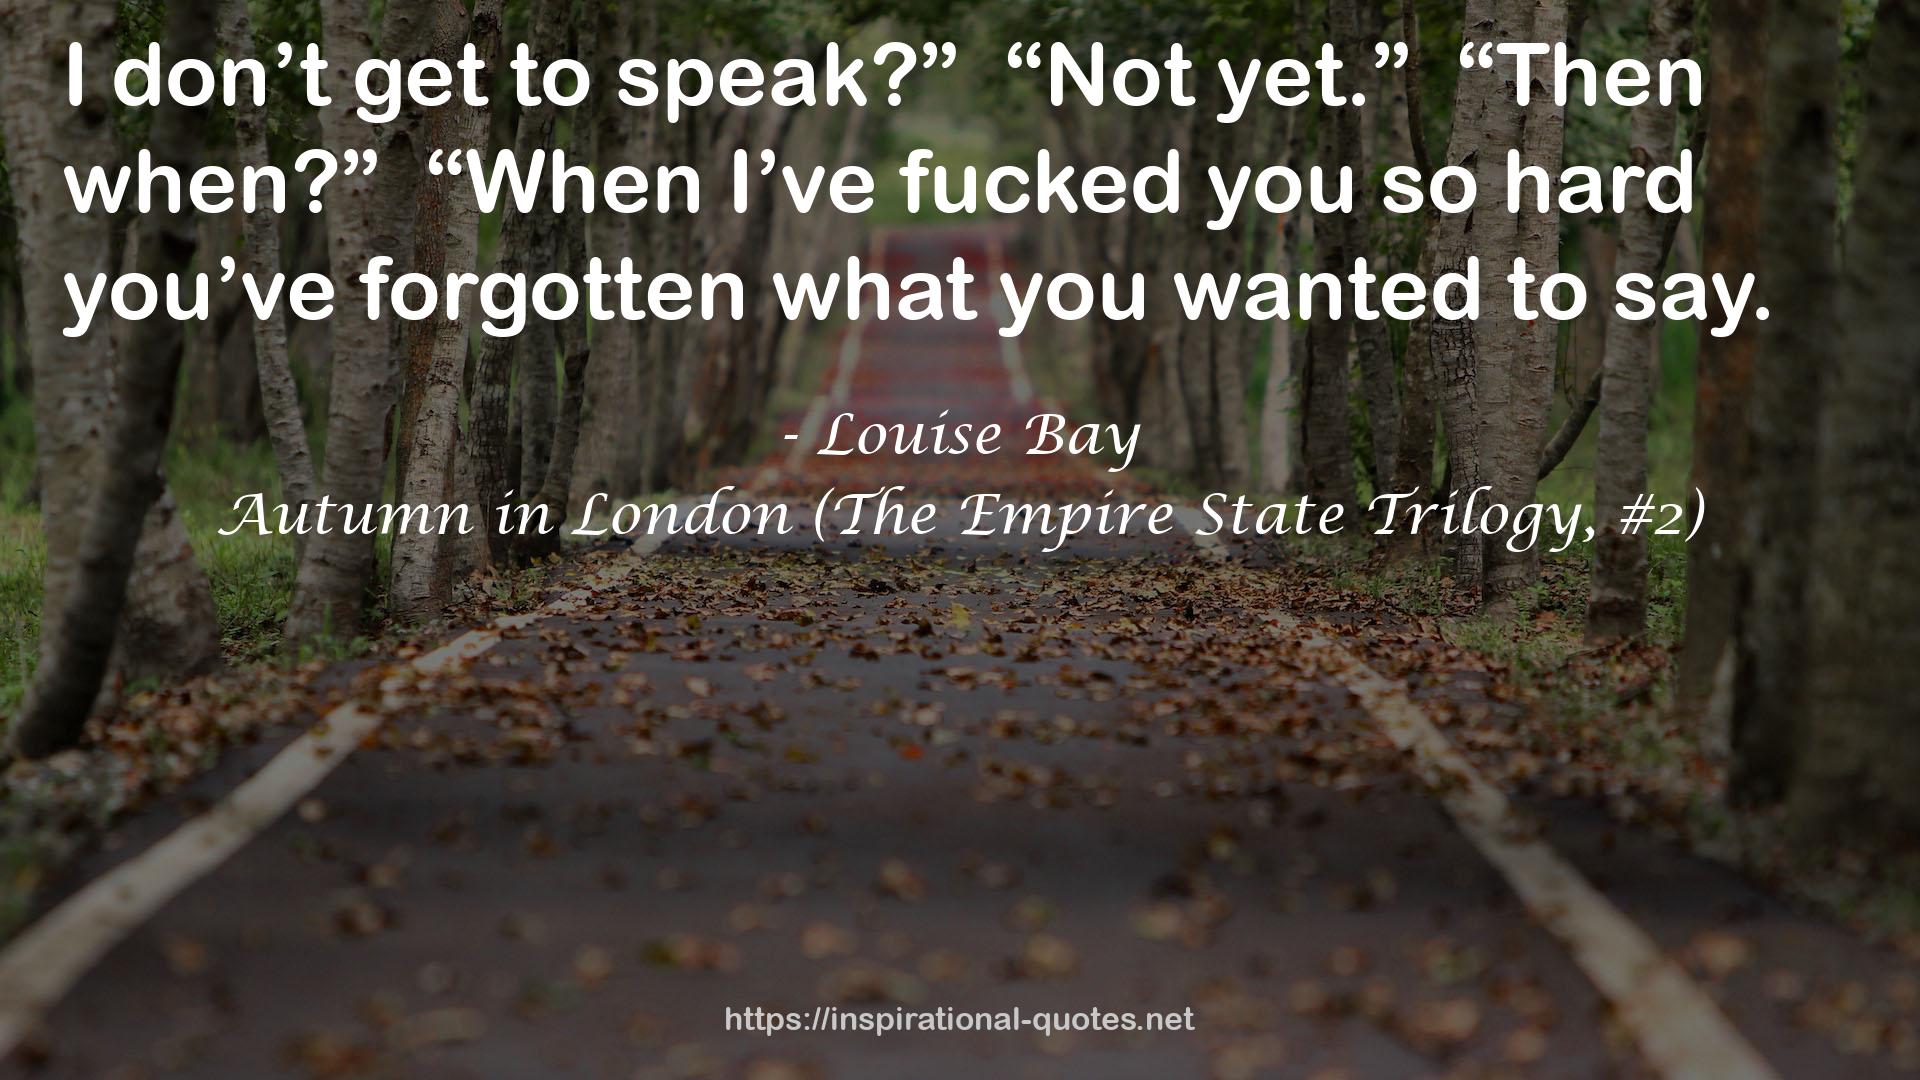 Autumn in London (The Empire State Trilogy, #2) QUOTES